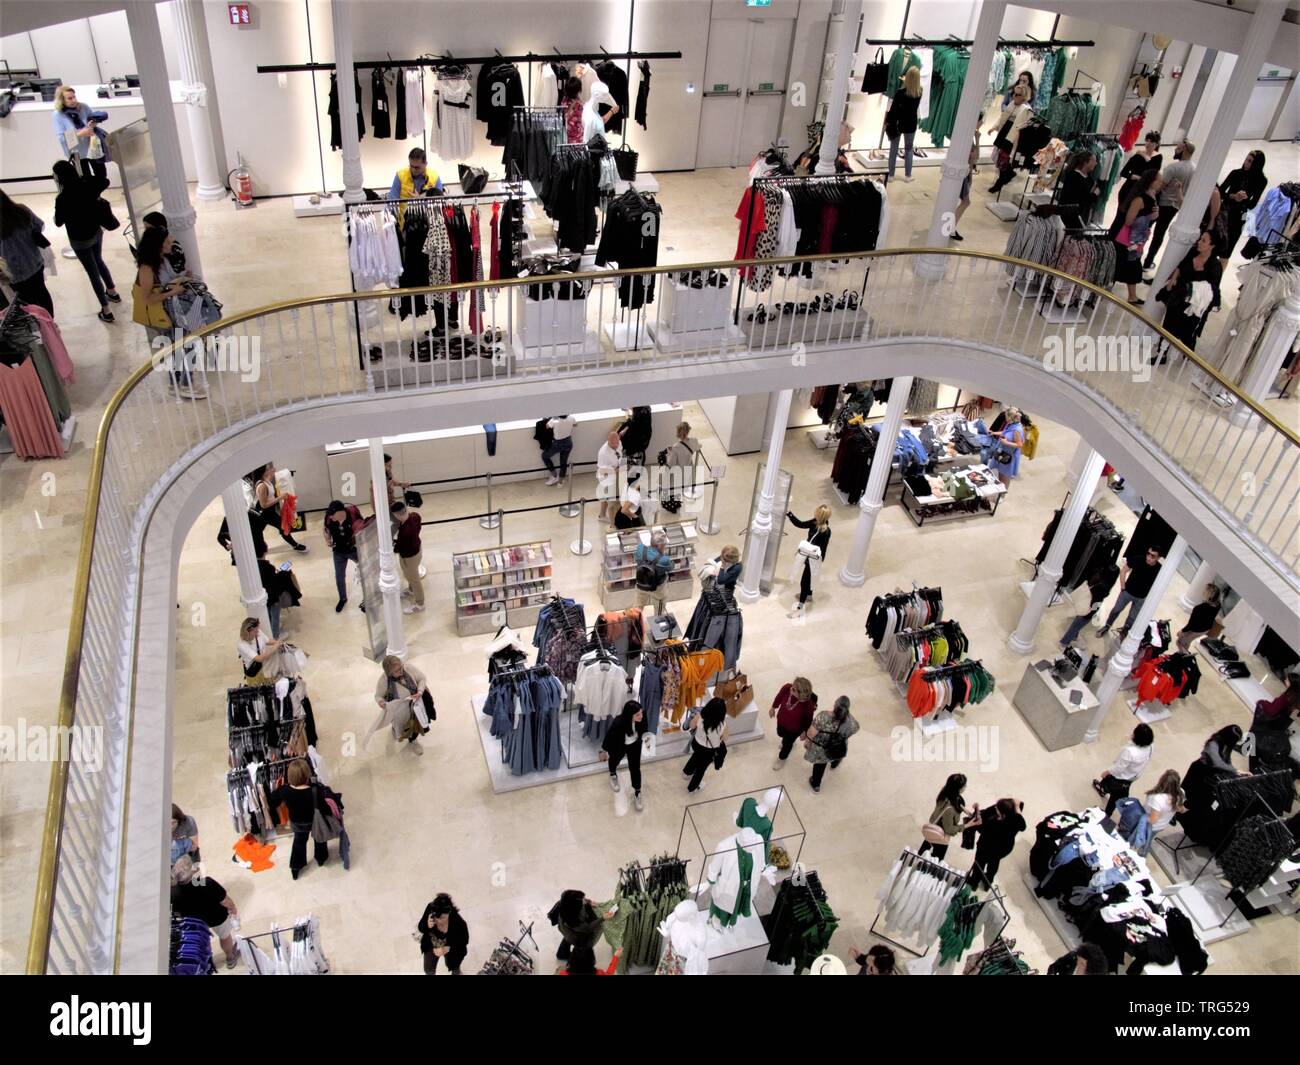 people and shops in Zara fashion store in Rome Stock Photo - Alamy